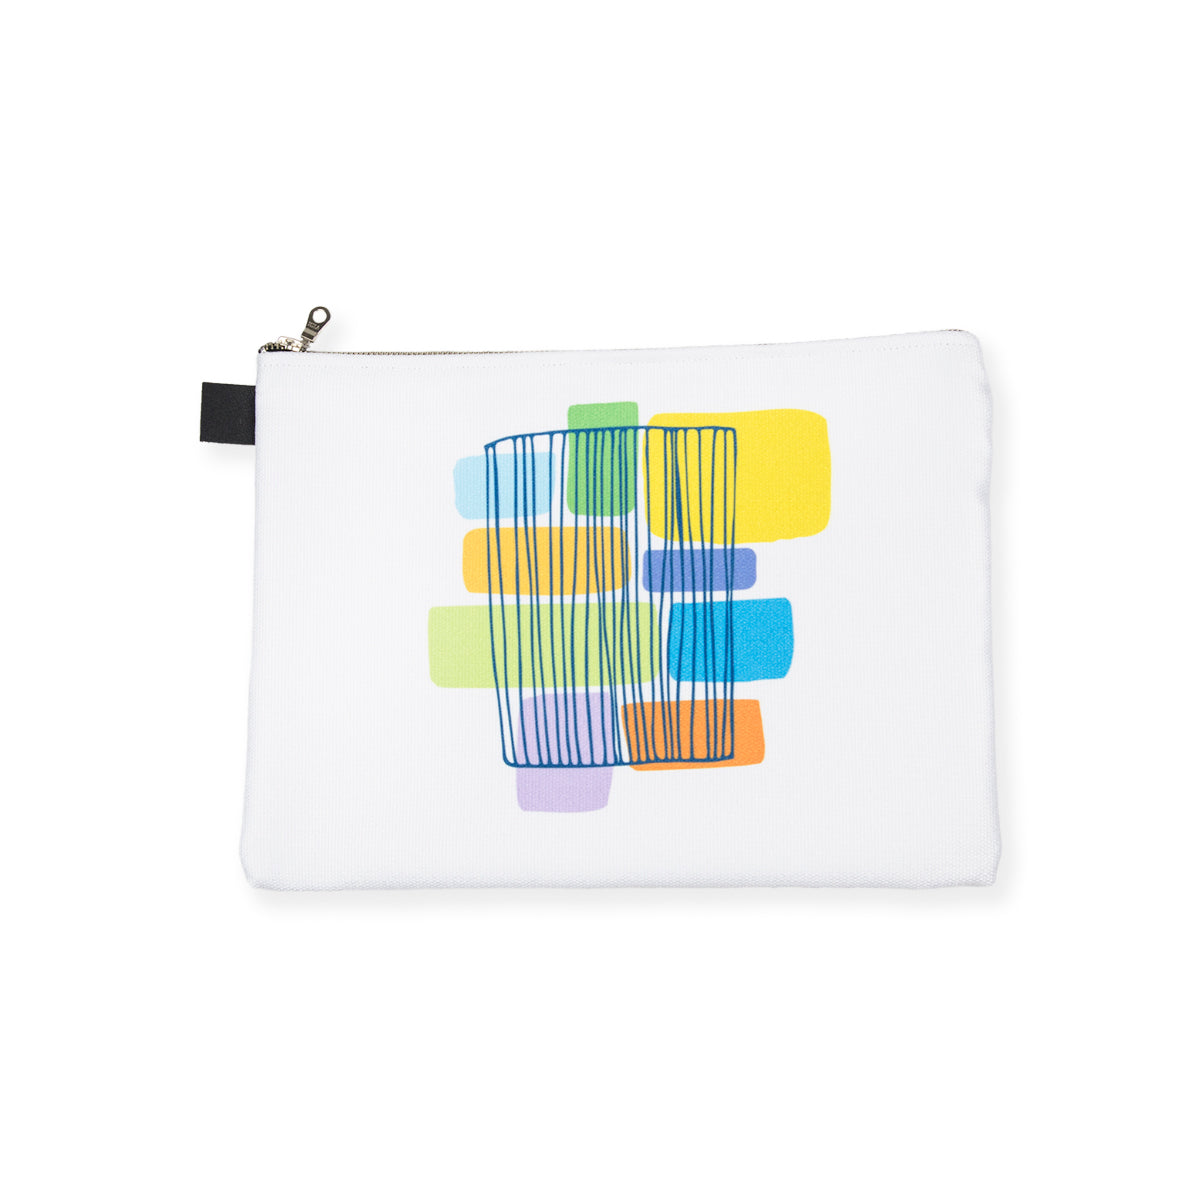 14" x 10.5" canvas zip pouch with abstract rectangular graphic in shades of yellow, green, orange, blue and purple